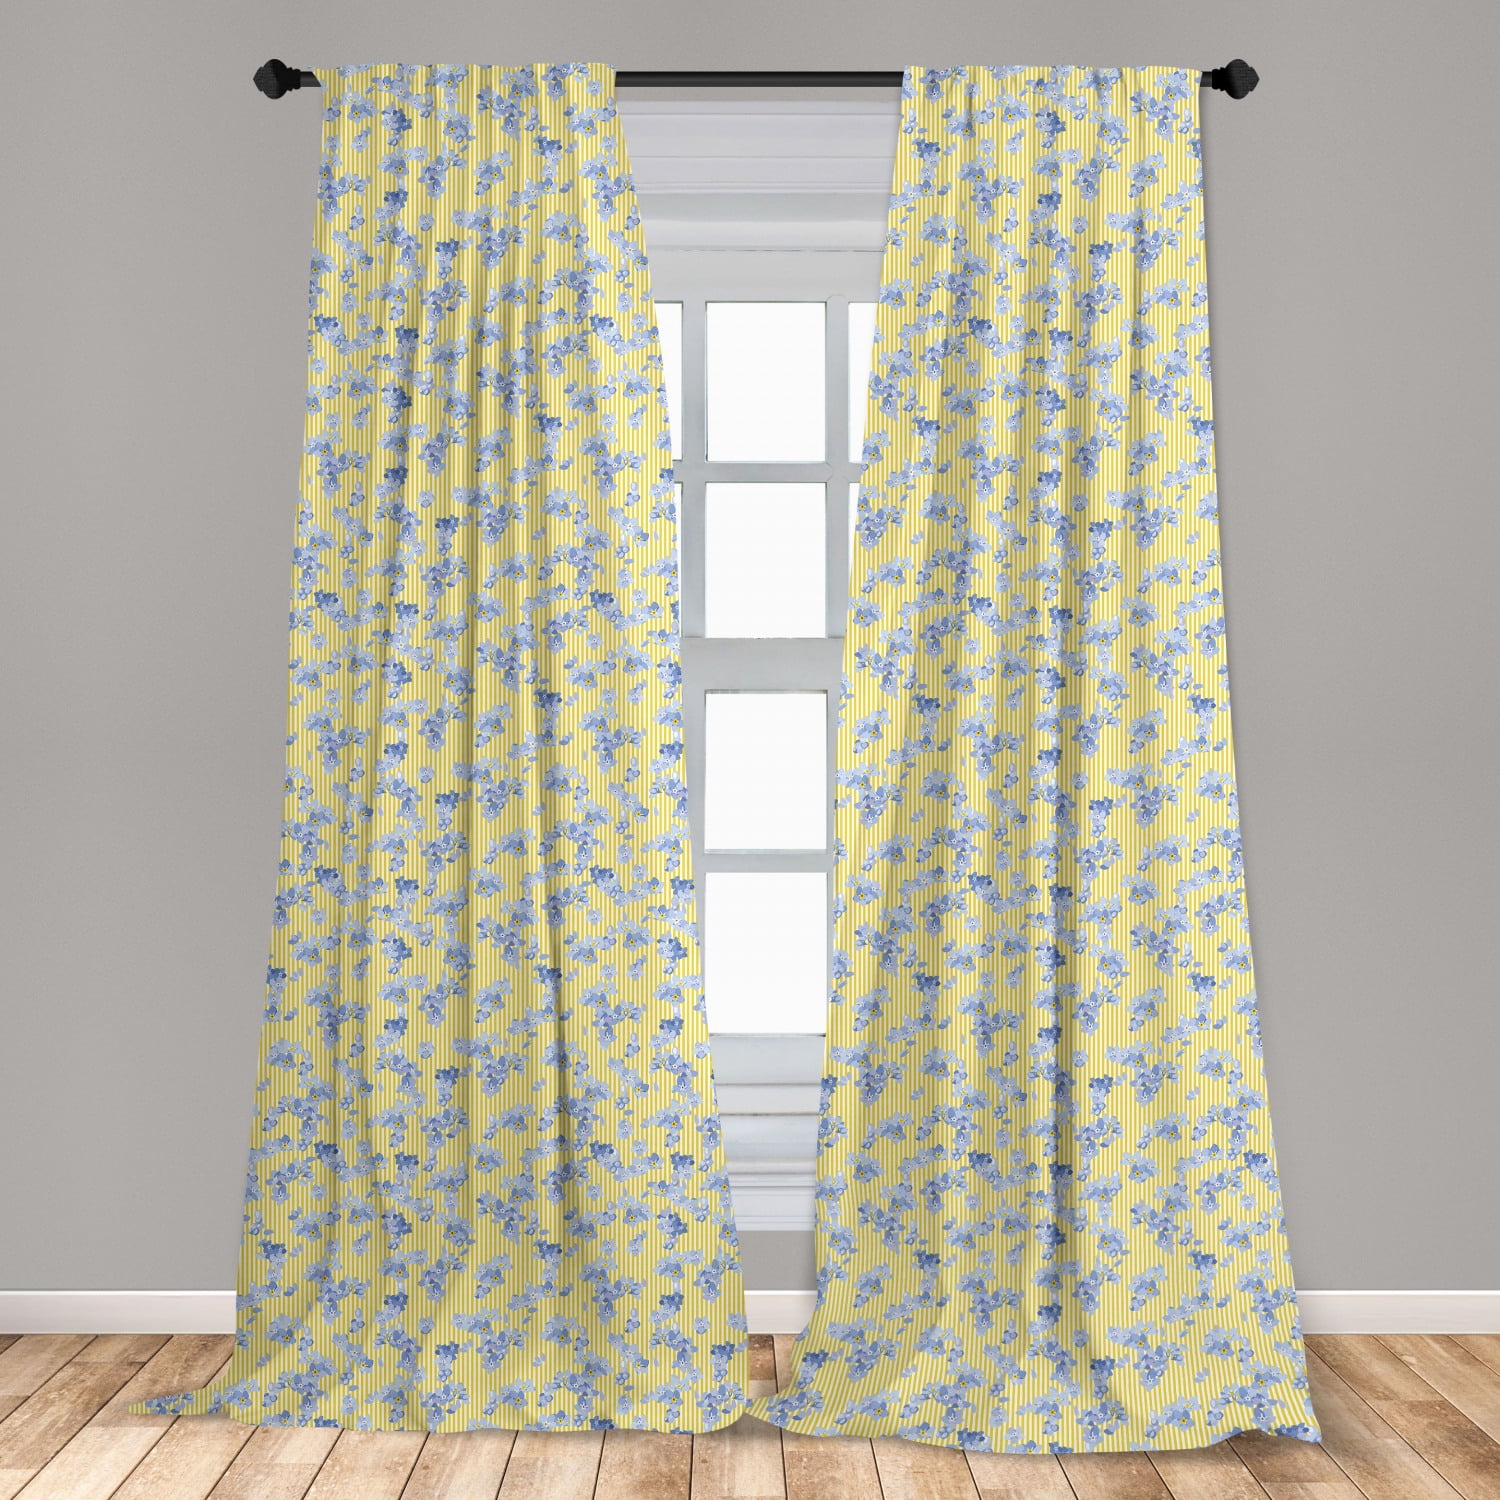 Bees and Dragonfly Kitchen Curtains 2 Panel Set Decor Window Drapes Sunflower 